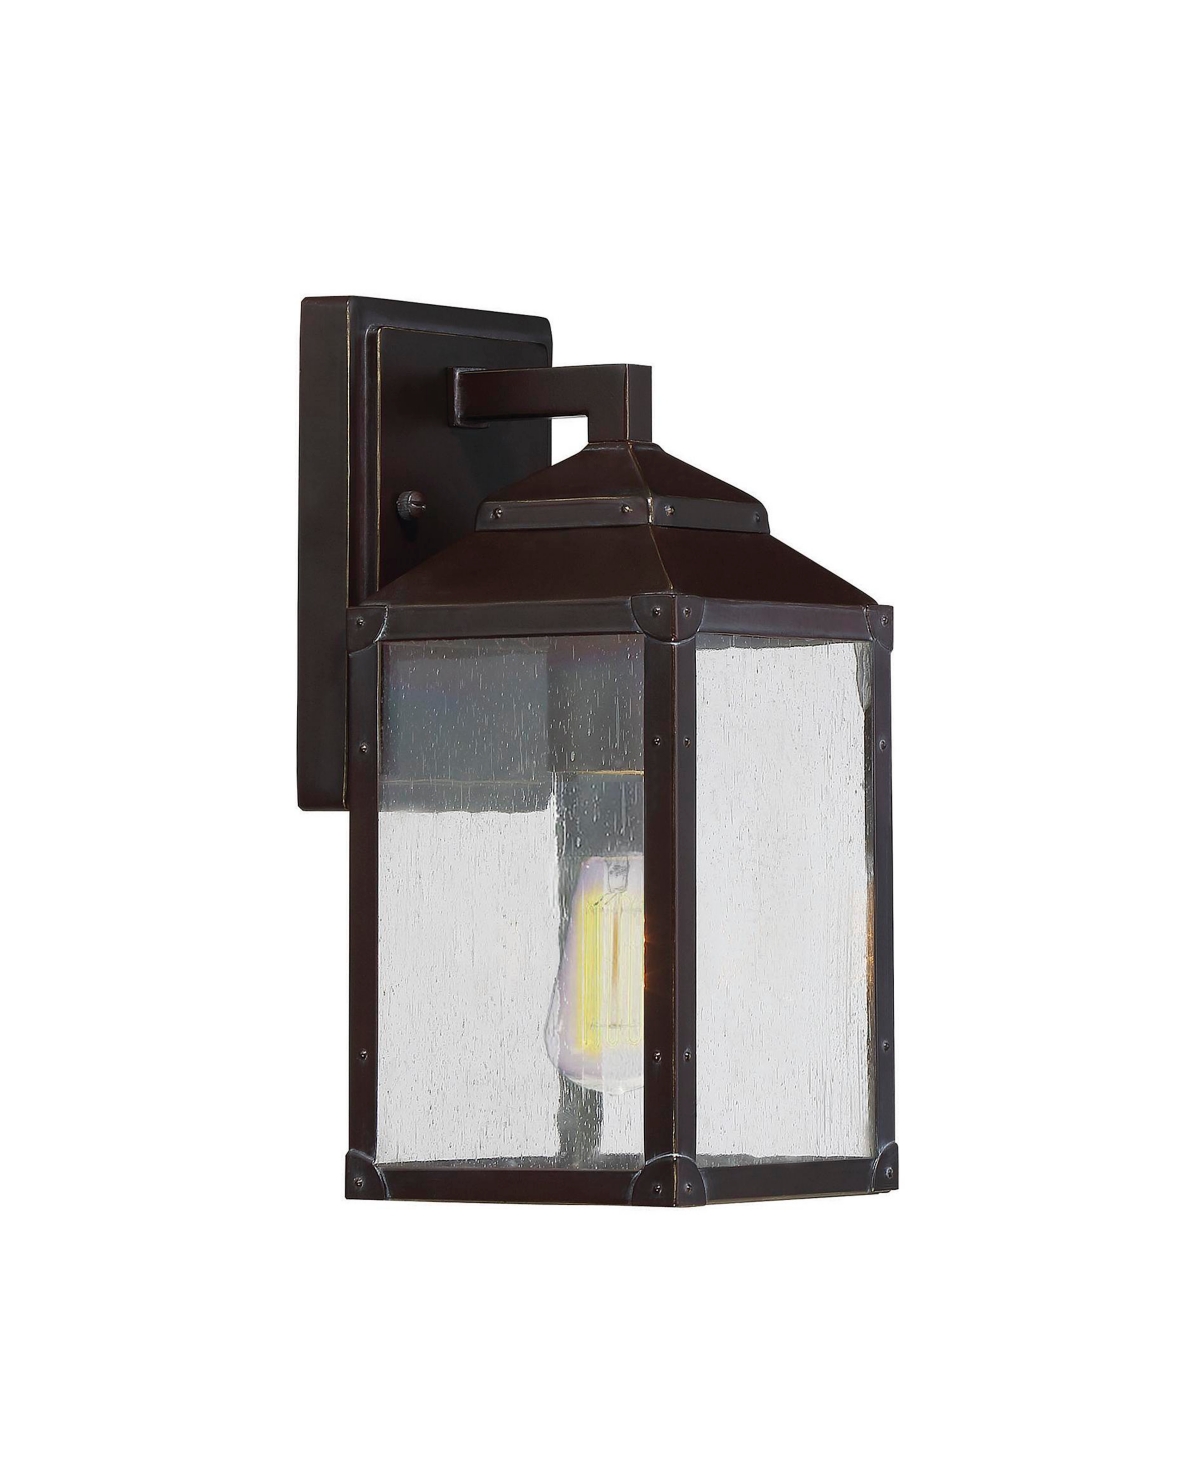 Brennan 1-Light Outdoor Wall Lantern in English Bronze with Gold - English bronze/gold